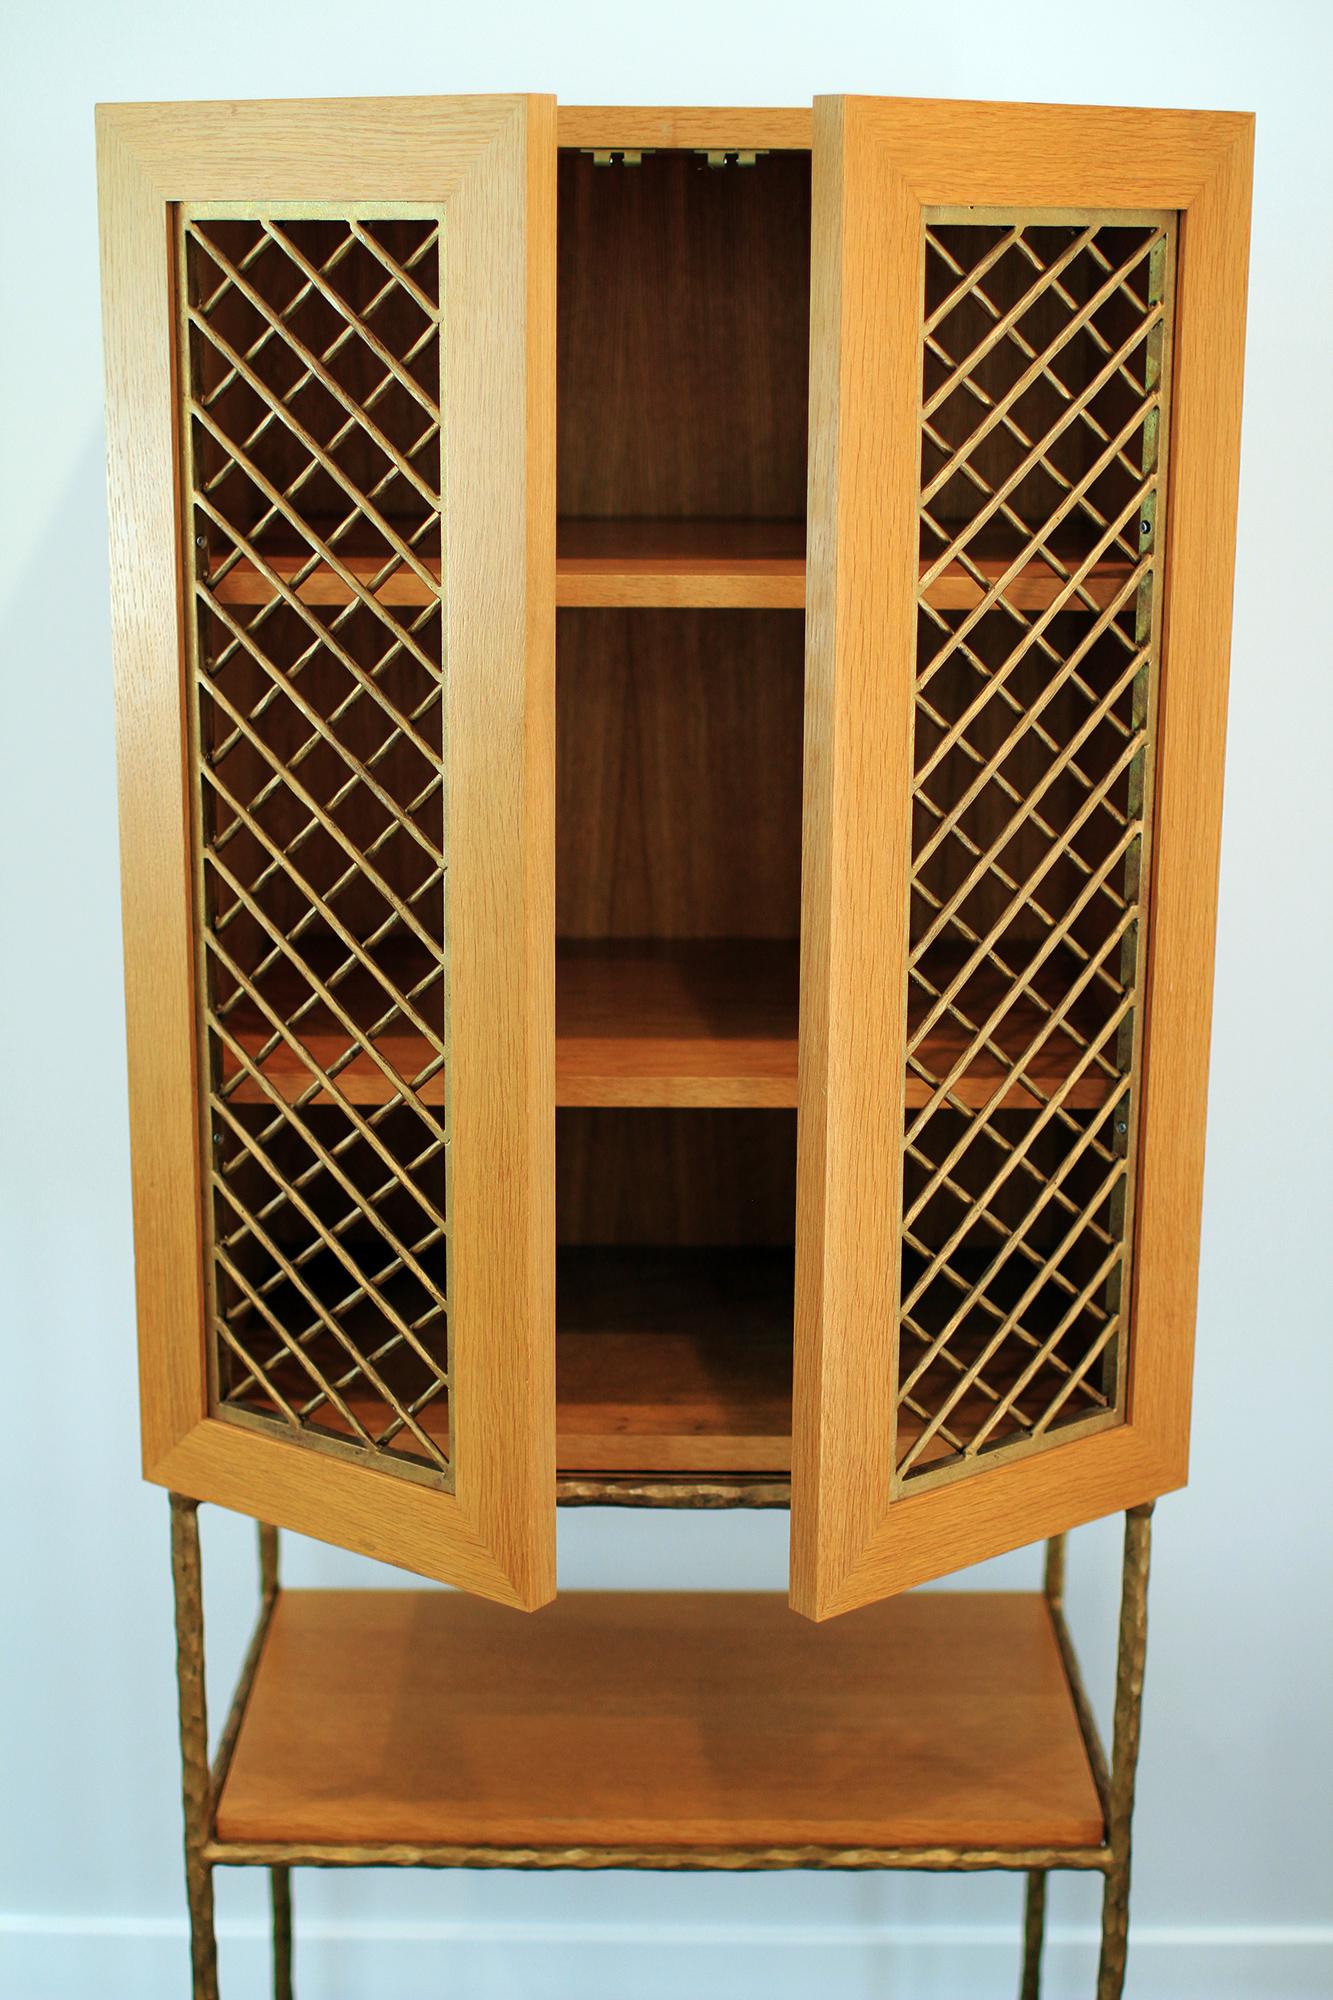 Garouste & Bonetti Cabinet, forged by Diego Giacometti's ironworker For Sale 7